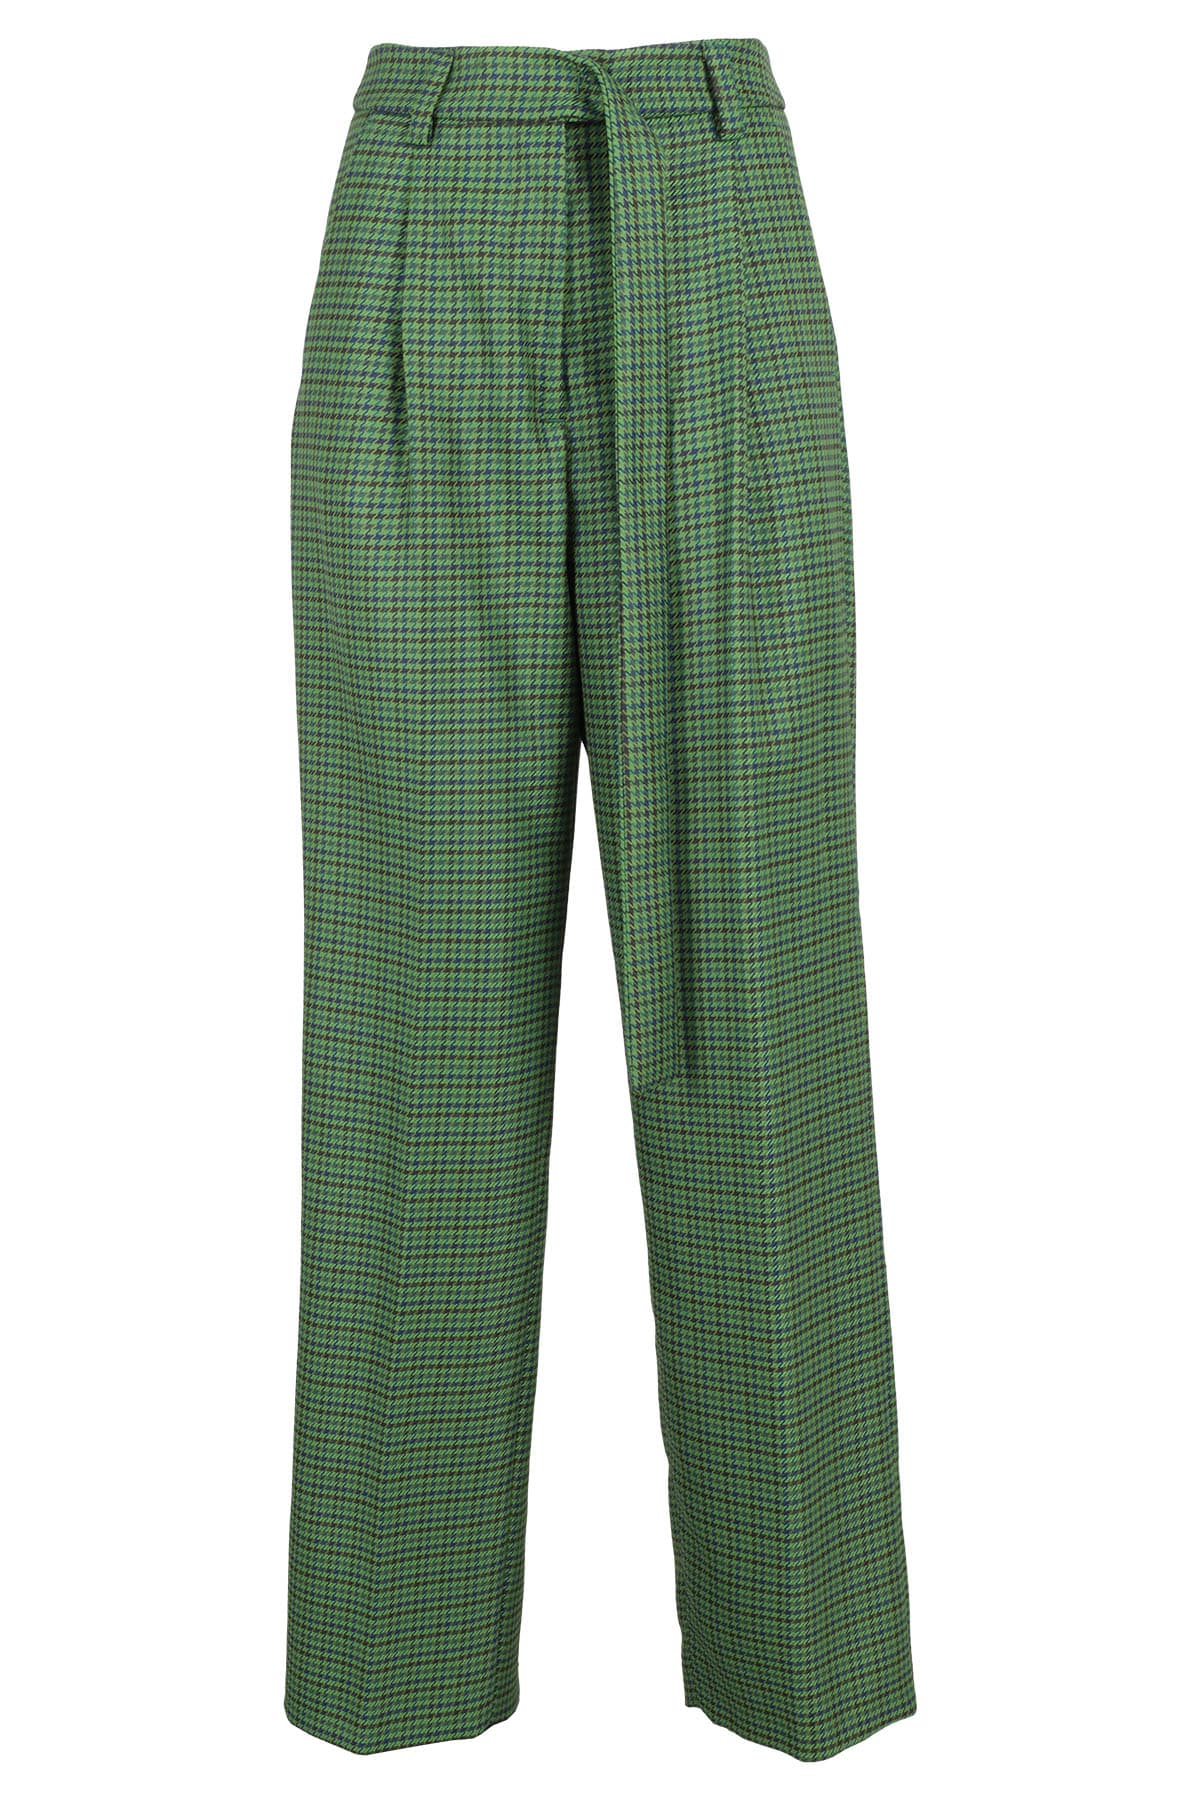 Attic and Barn Floaty Pant